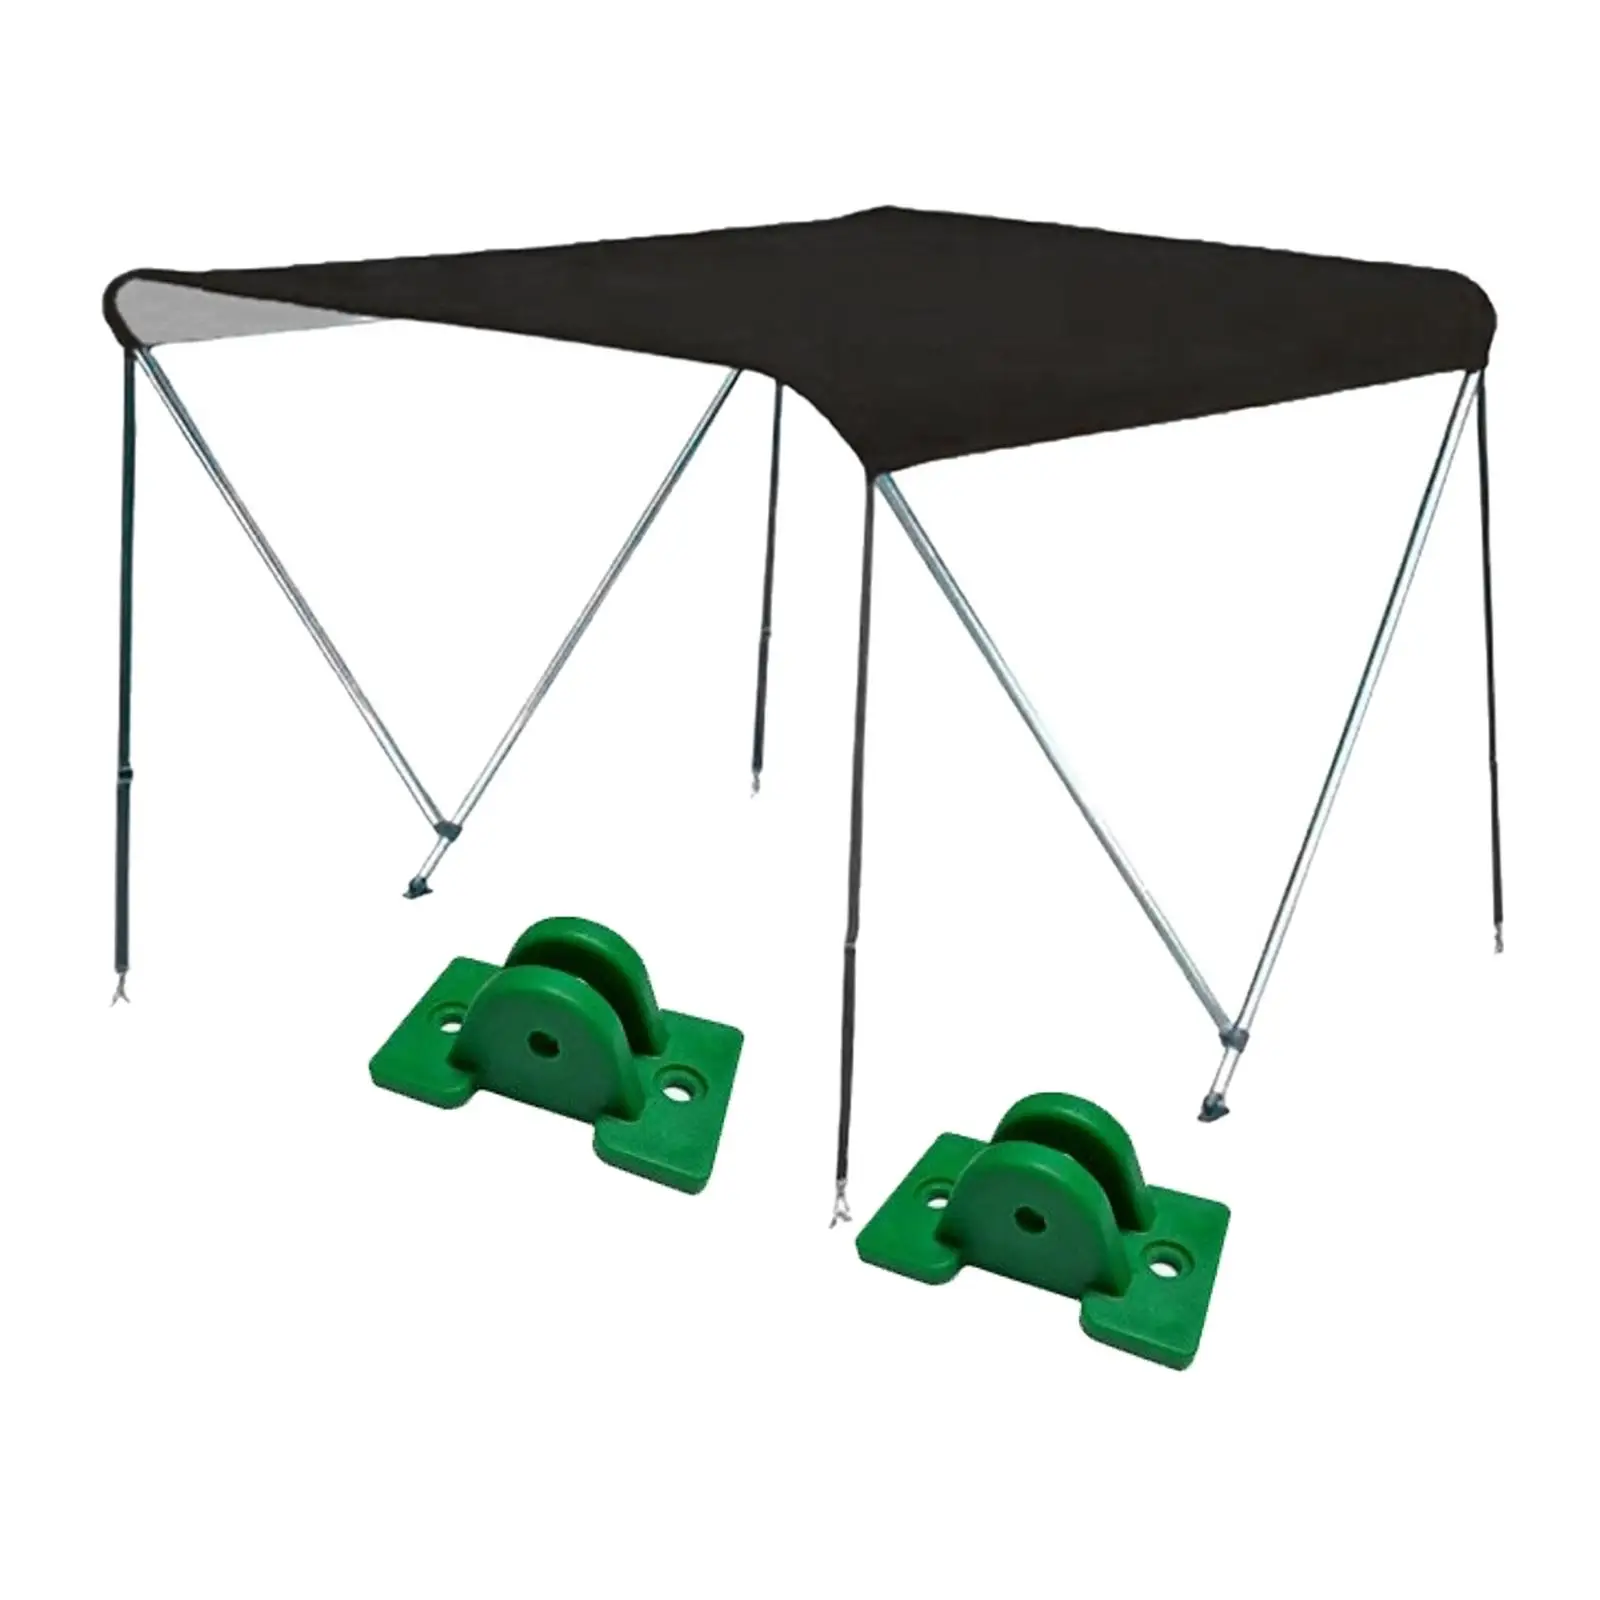 Boat Bimini Top Cover Boat Canopy for Kayak with A Width of 1-1.4 Meters